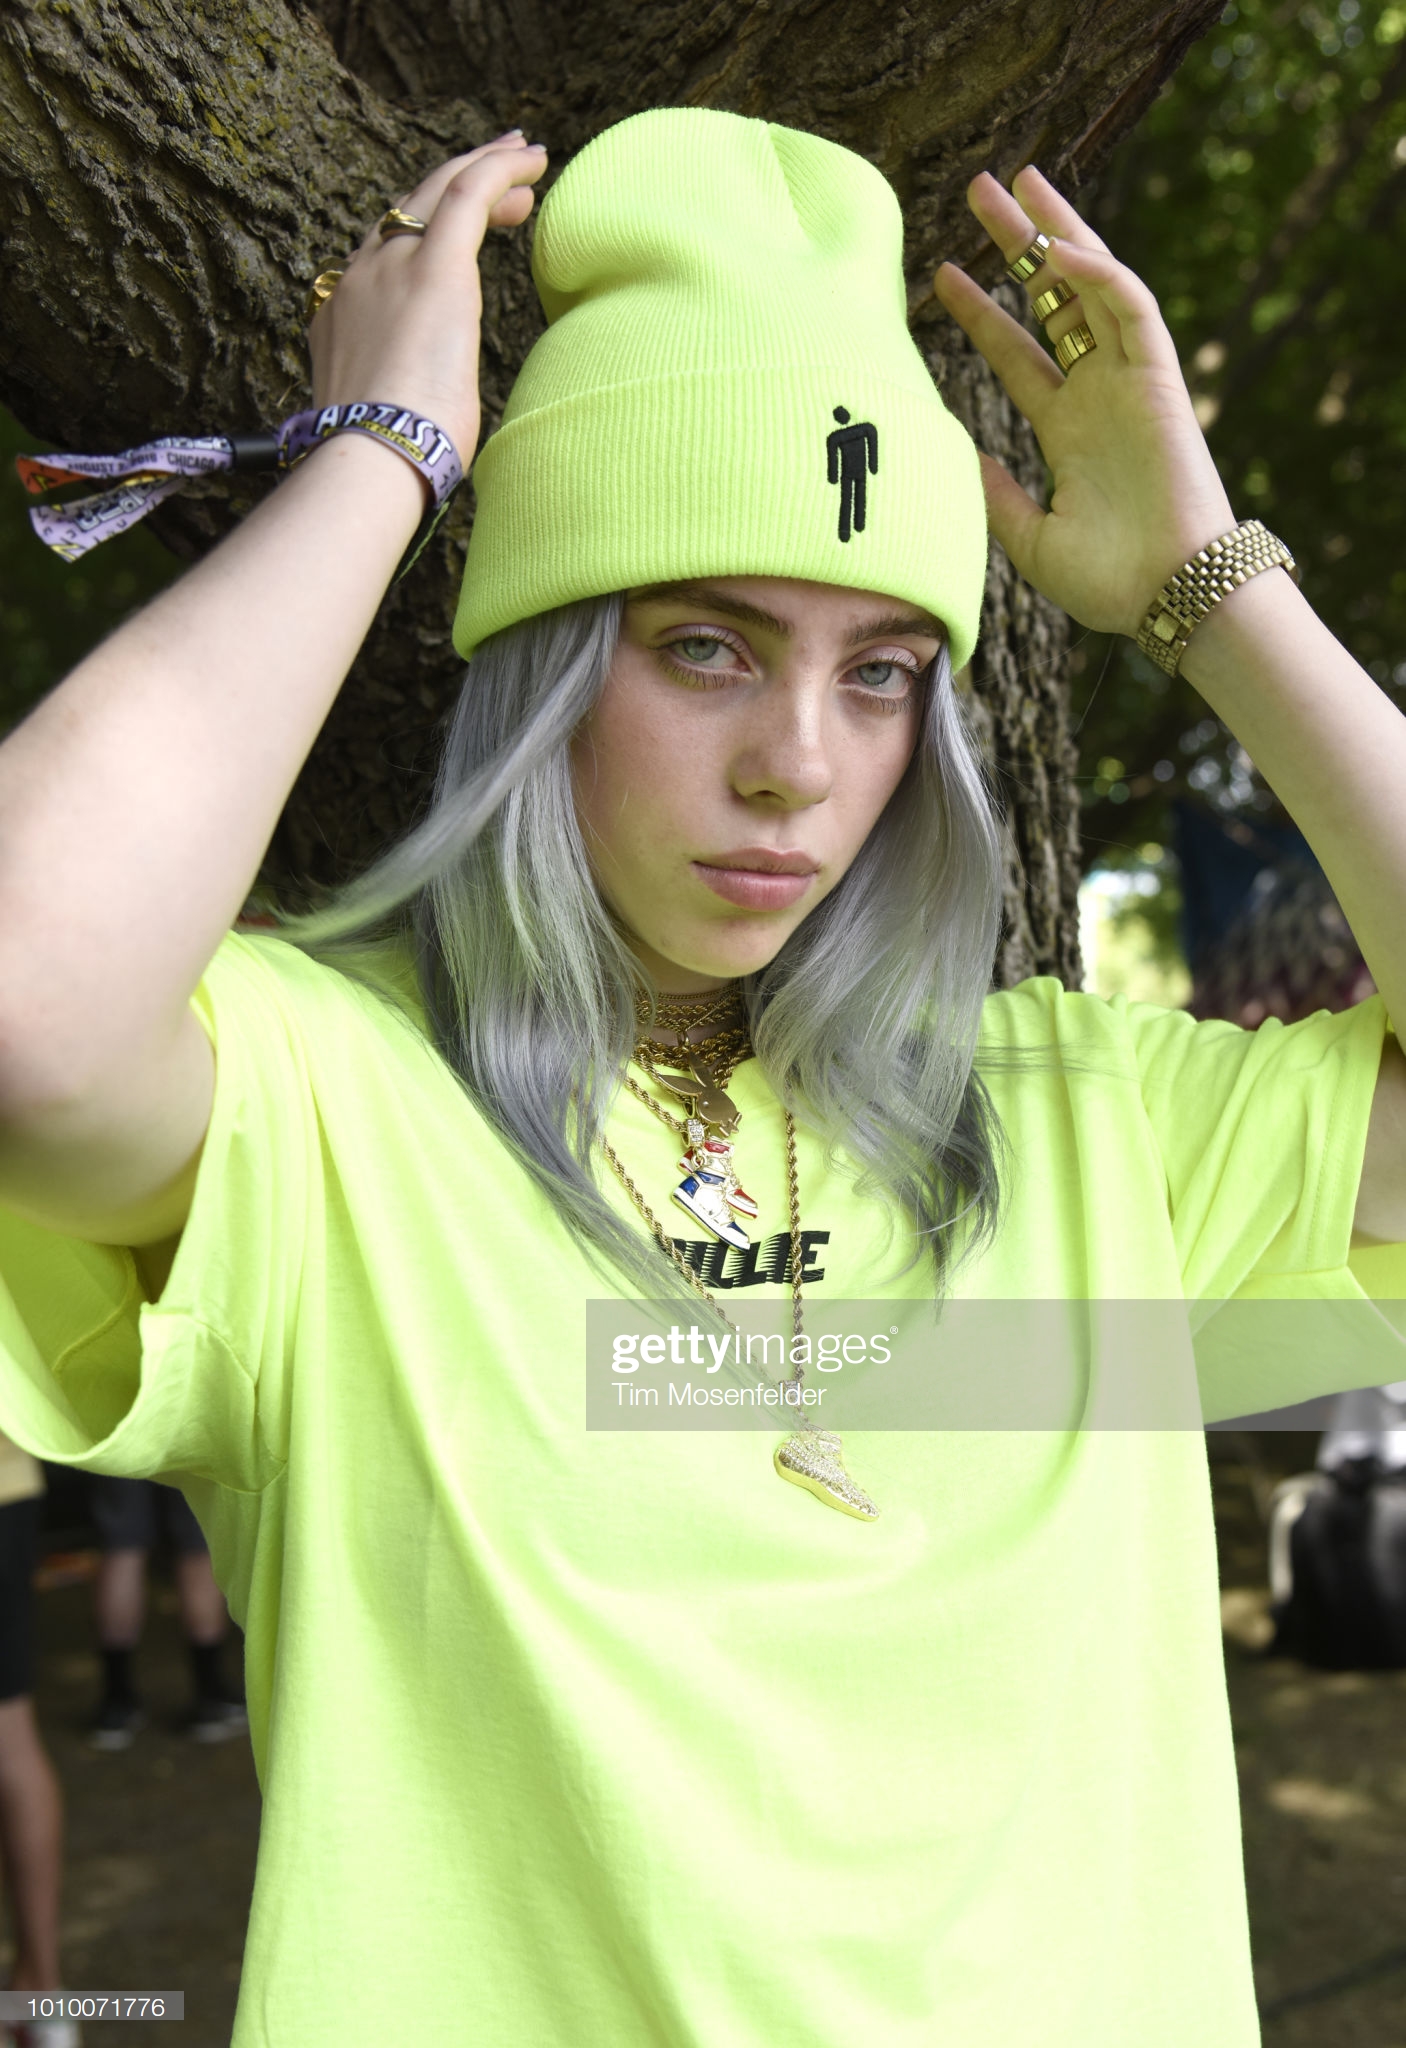 gettyimages-1010071776-2048x2048.jpg